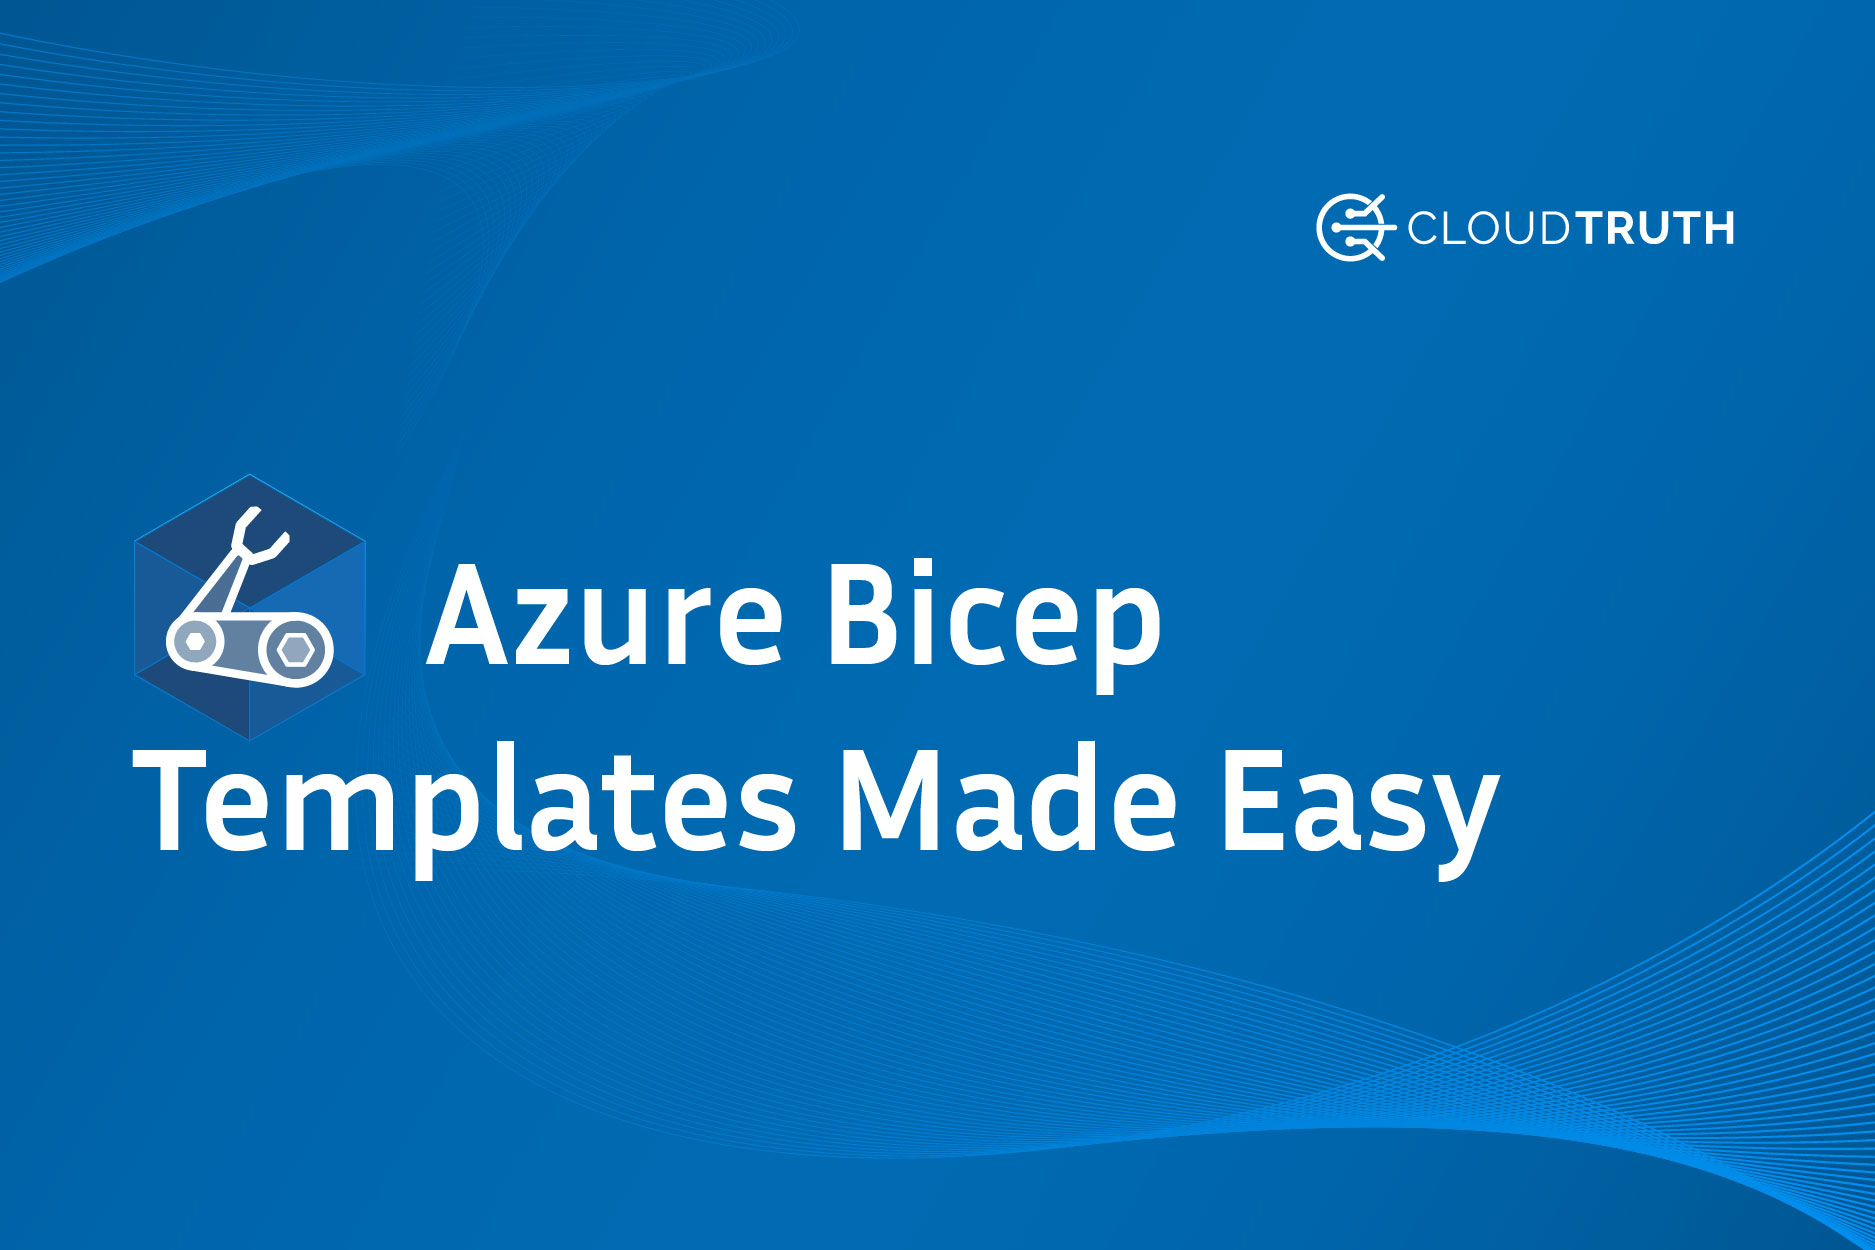 Create Azure Bicep Templates with CloudTruth